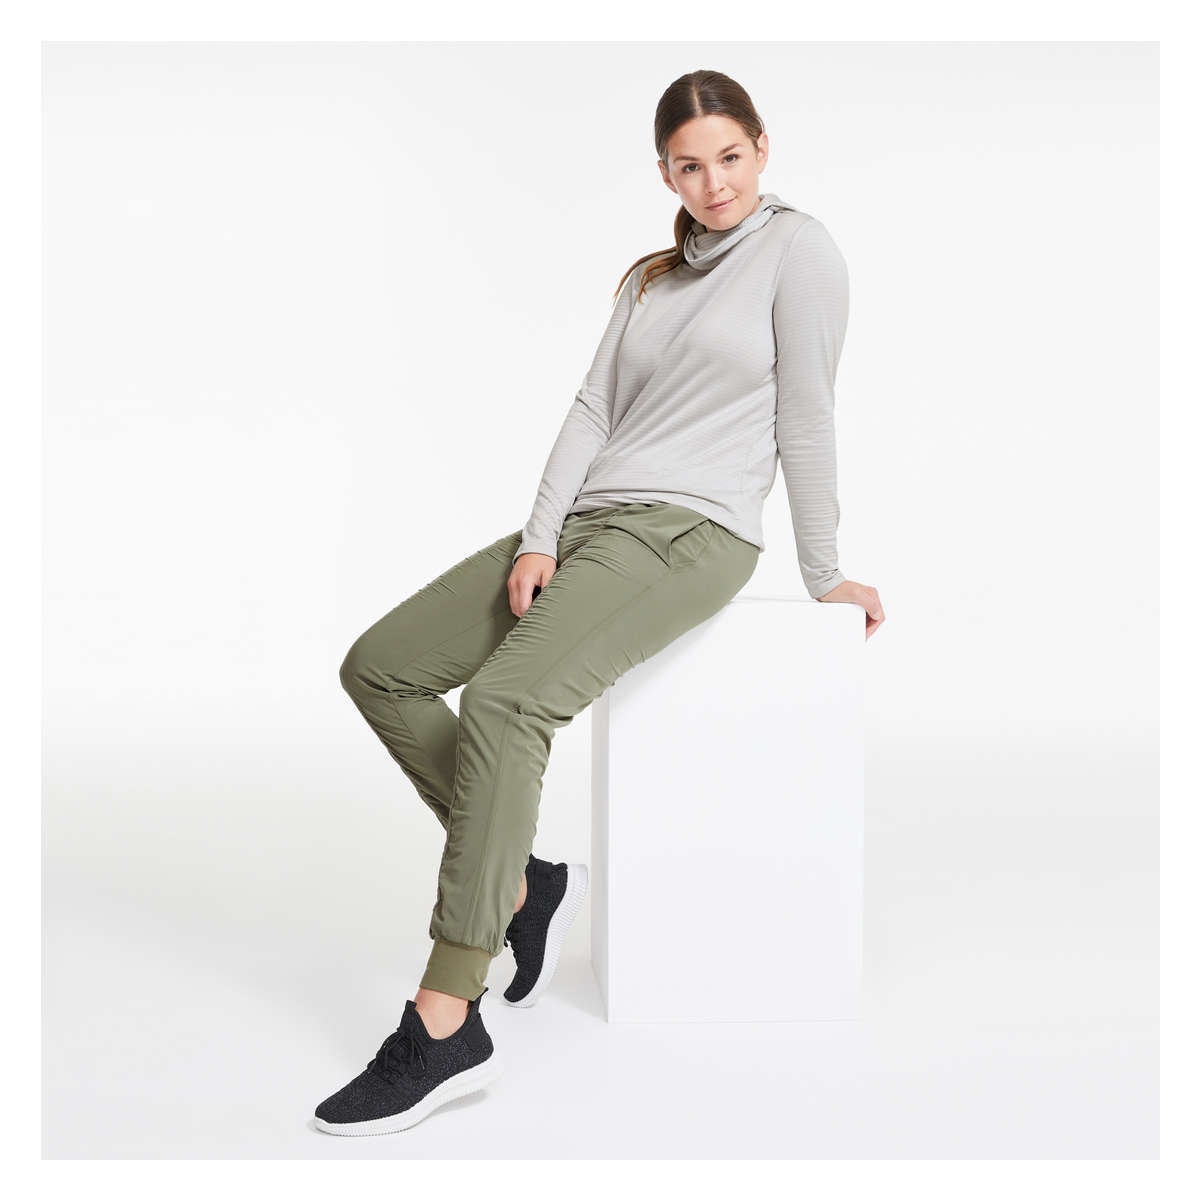 Ruched Active Pant in Olive from Joe Fresh